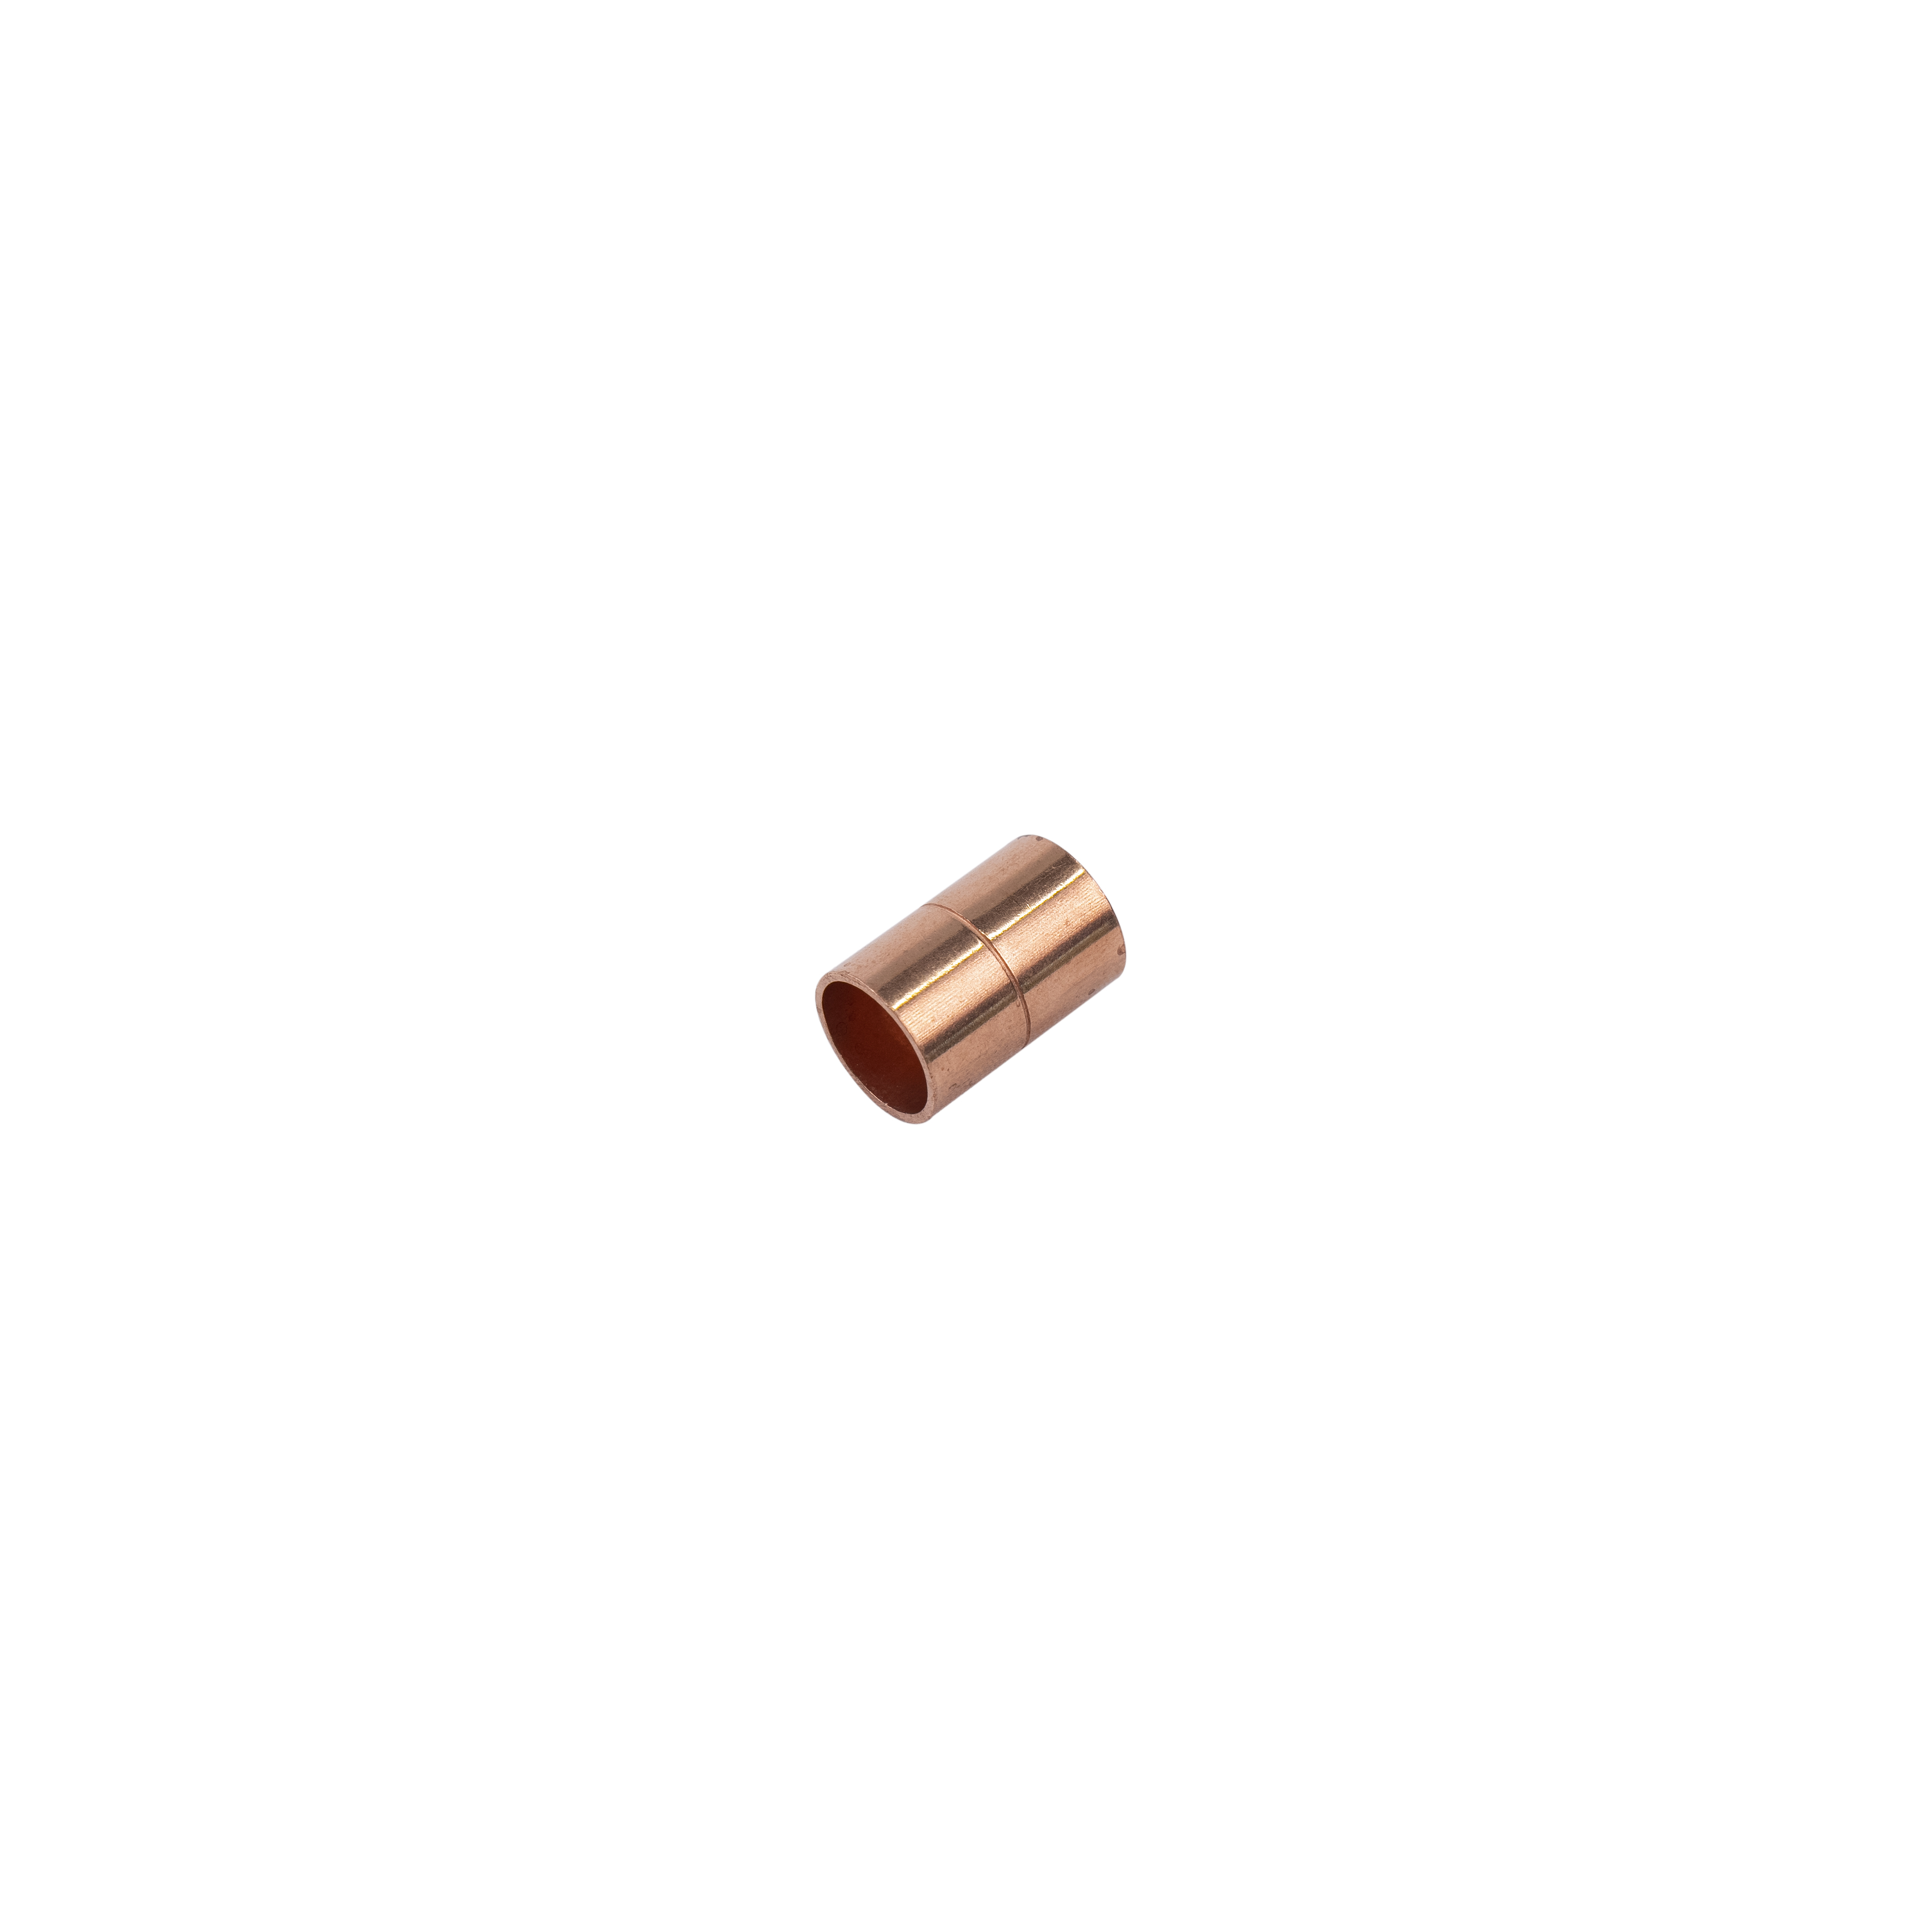 1 inch Copper Coupling R410a